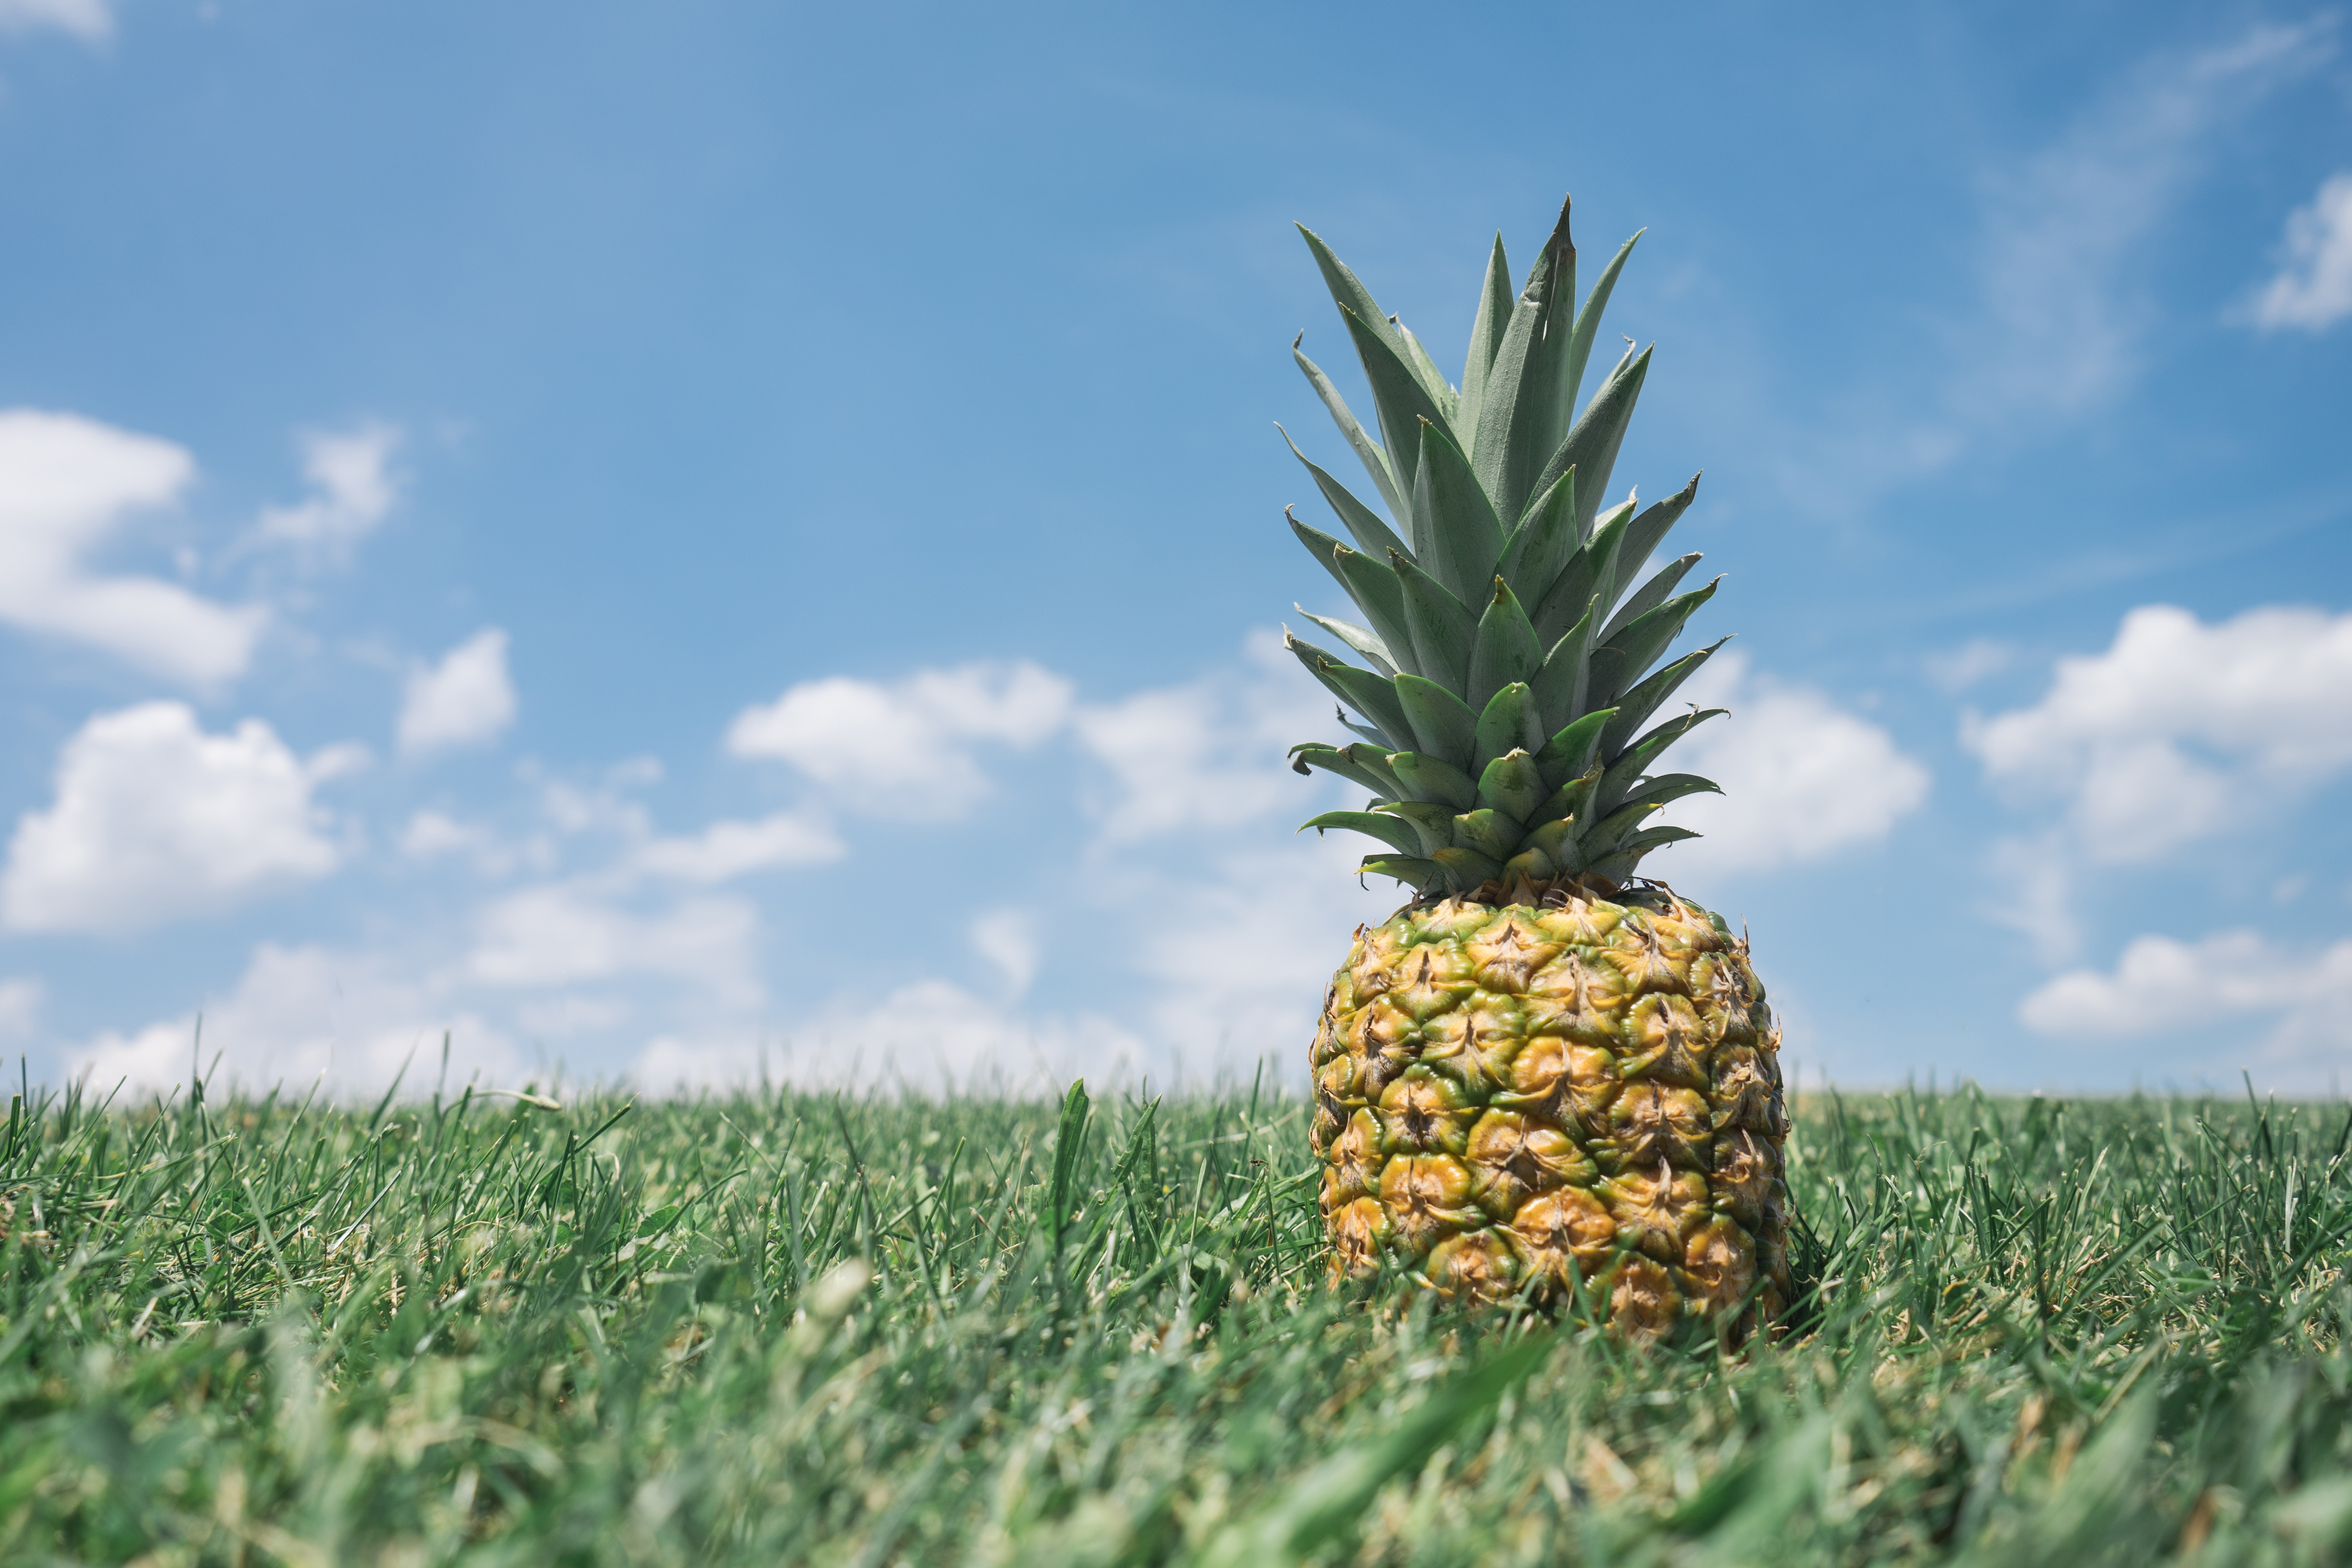 Will the creation of the Pineapple Fund inspire other social impact crypto projects?